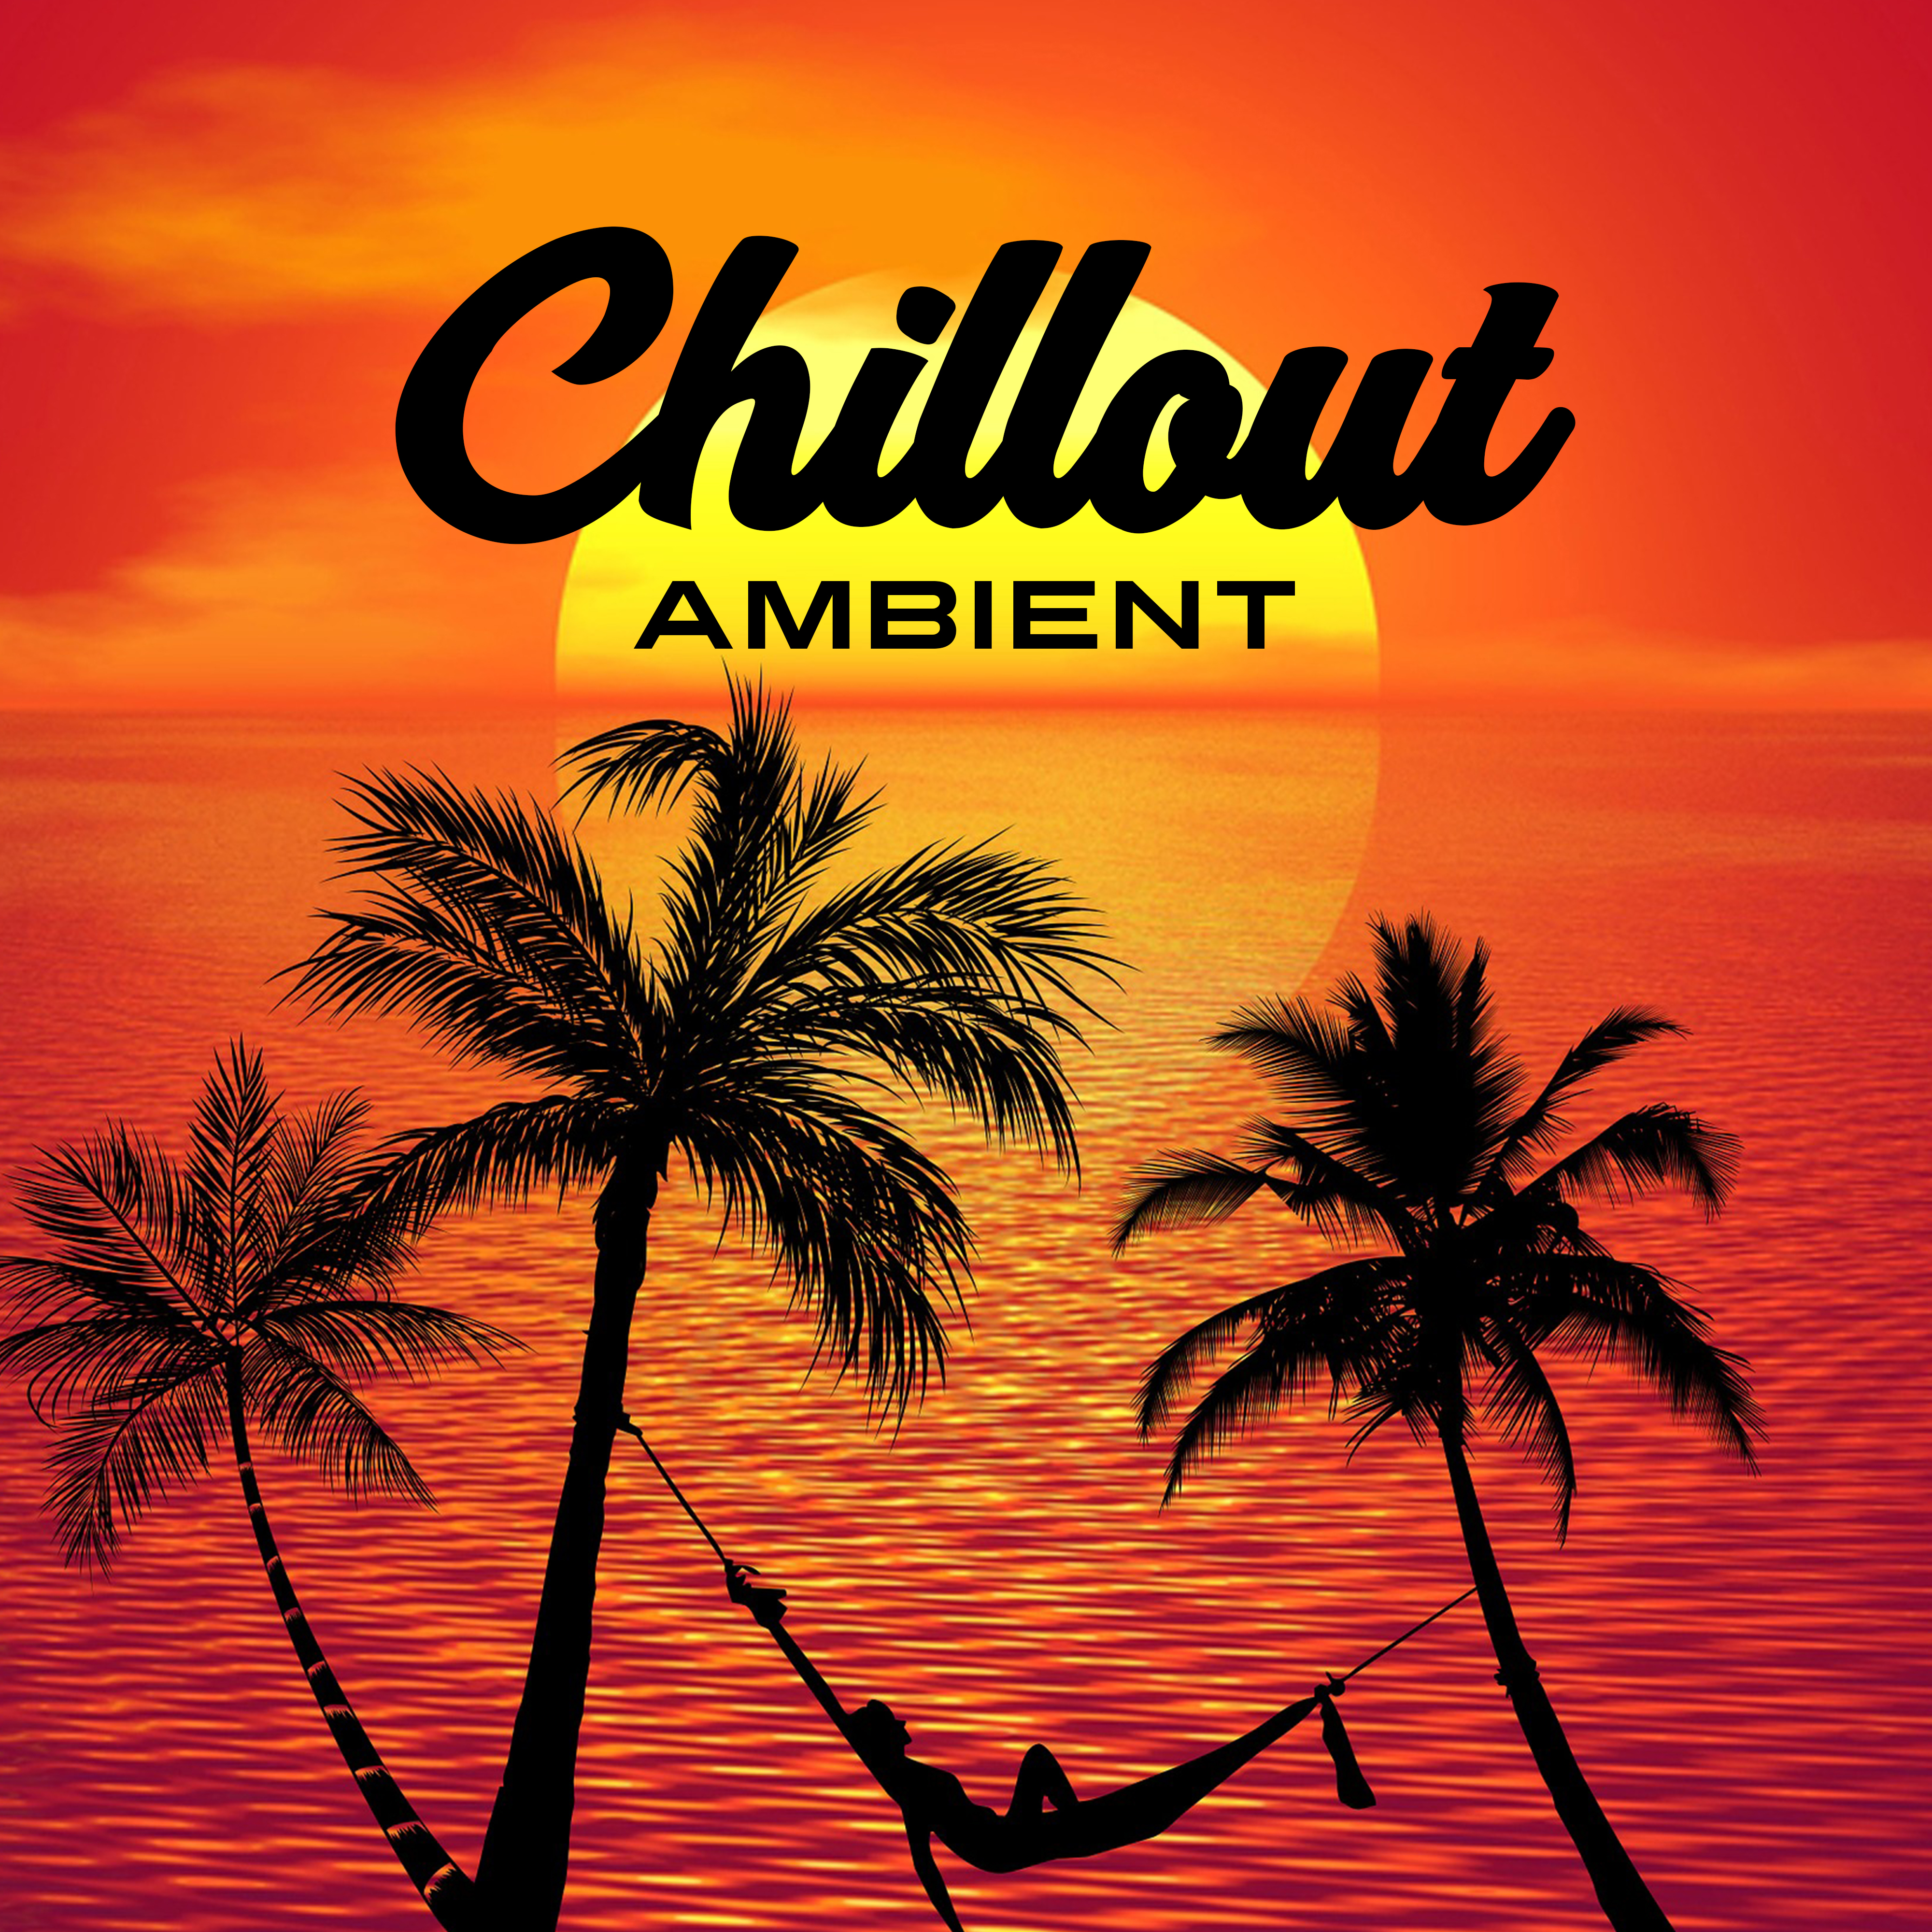 Chillout Ambient – New Album, Electronic Beats, Chill Out 2017, Summer Lounge, Relaxation